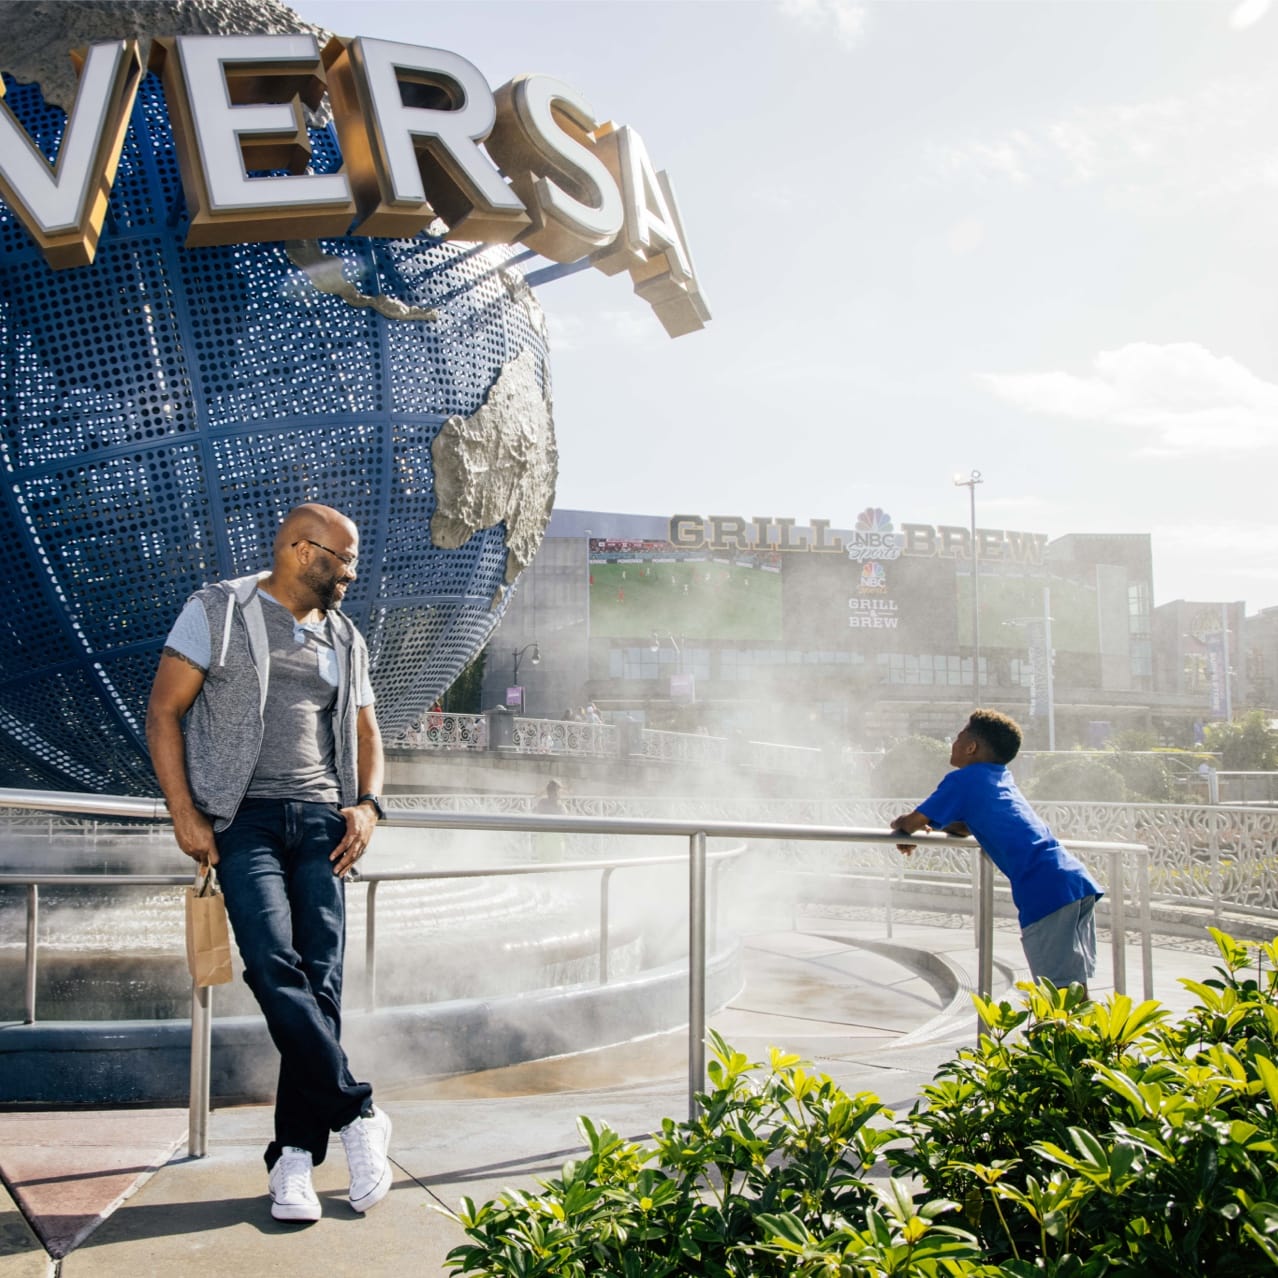 Islands Of Adventure  Travel Guide With The Travel Mom 